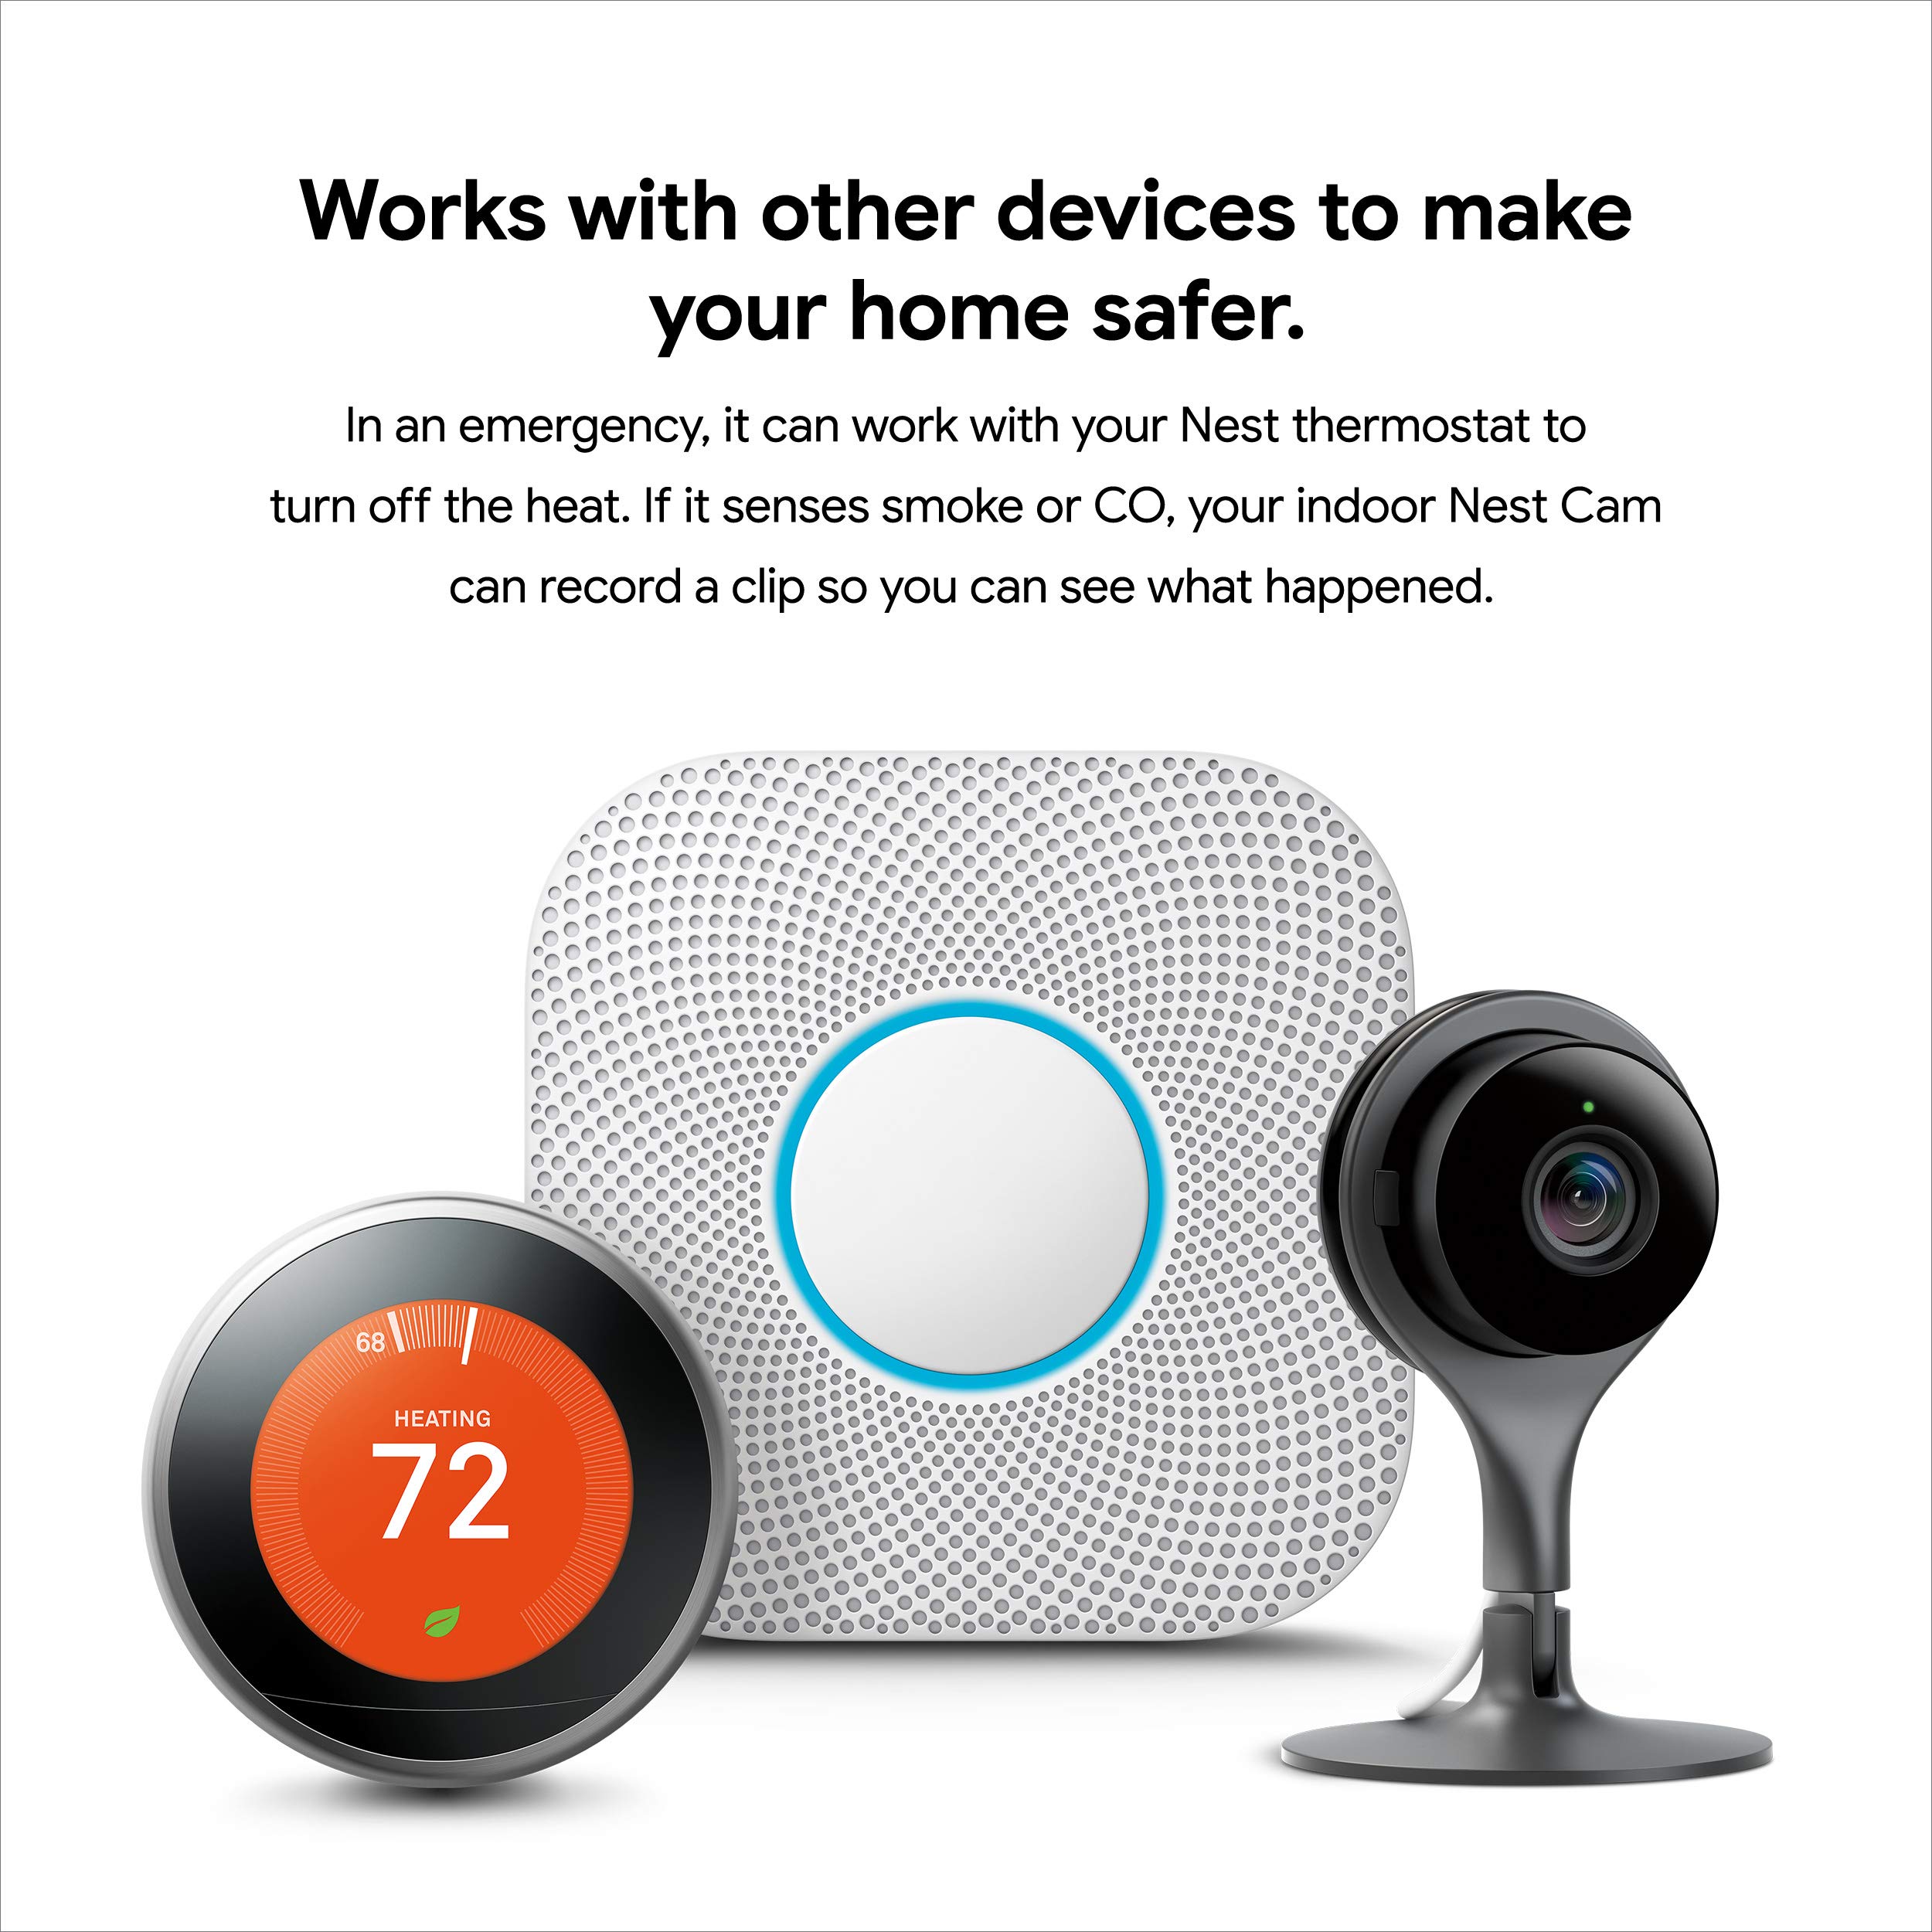 Google Nest Protect - Smoke Alarm - Smoke Detector and Carbon Monoxide Detector - Wired, White